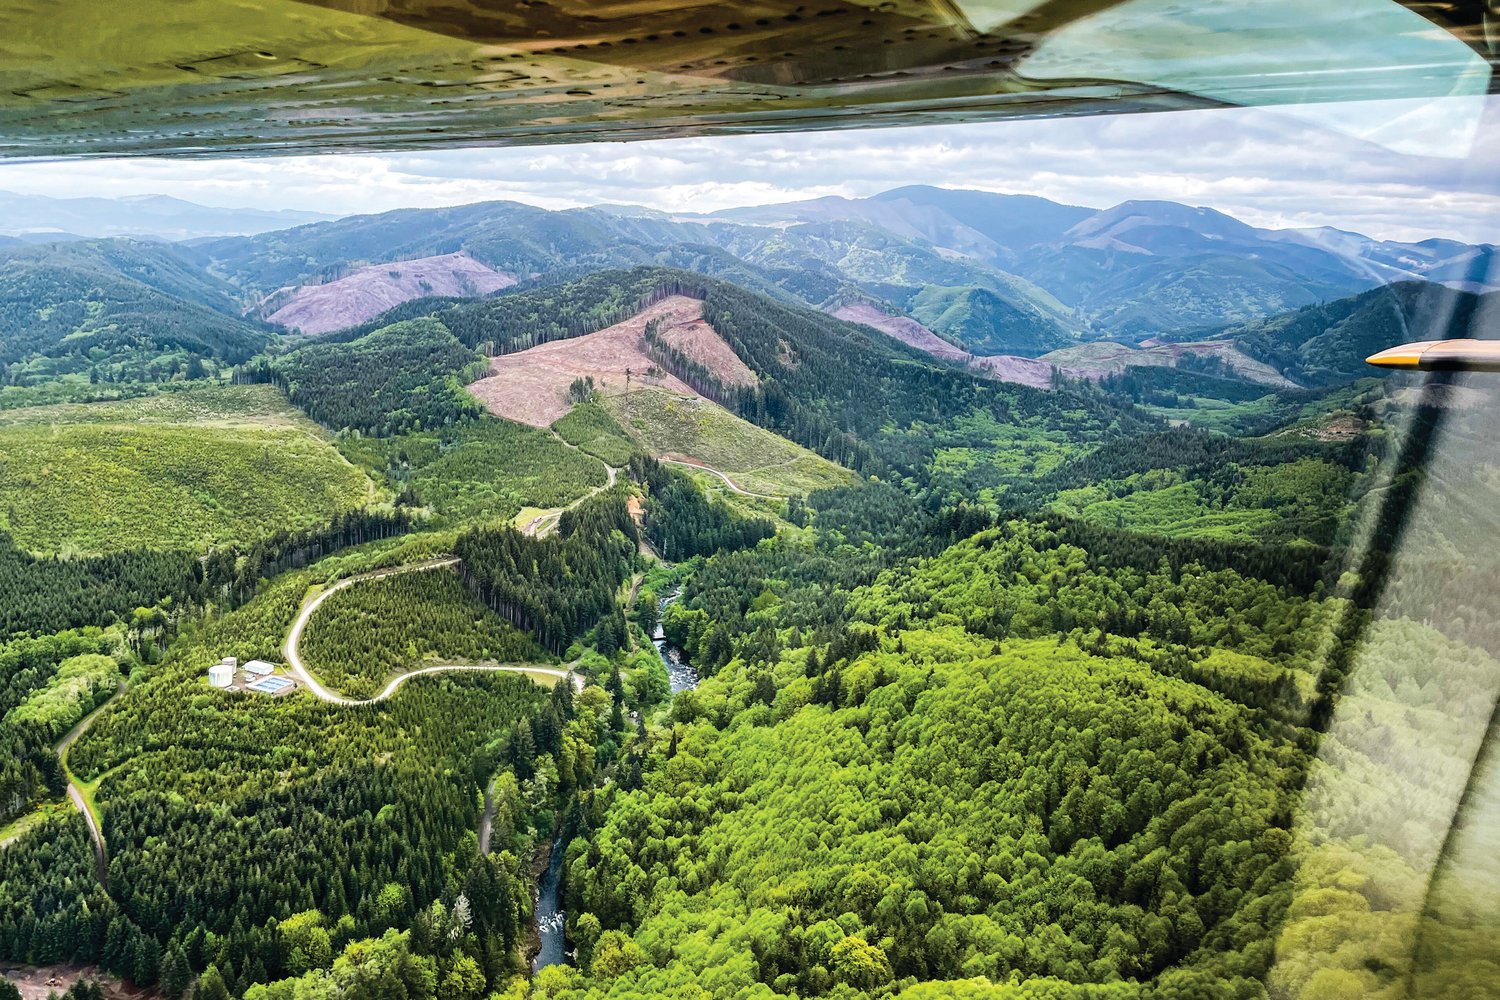 The Chehalis River headwaters begin in the Willapa Hills seen from Dave Neiser’s Cessna Cardinal on Friday.